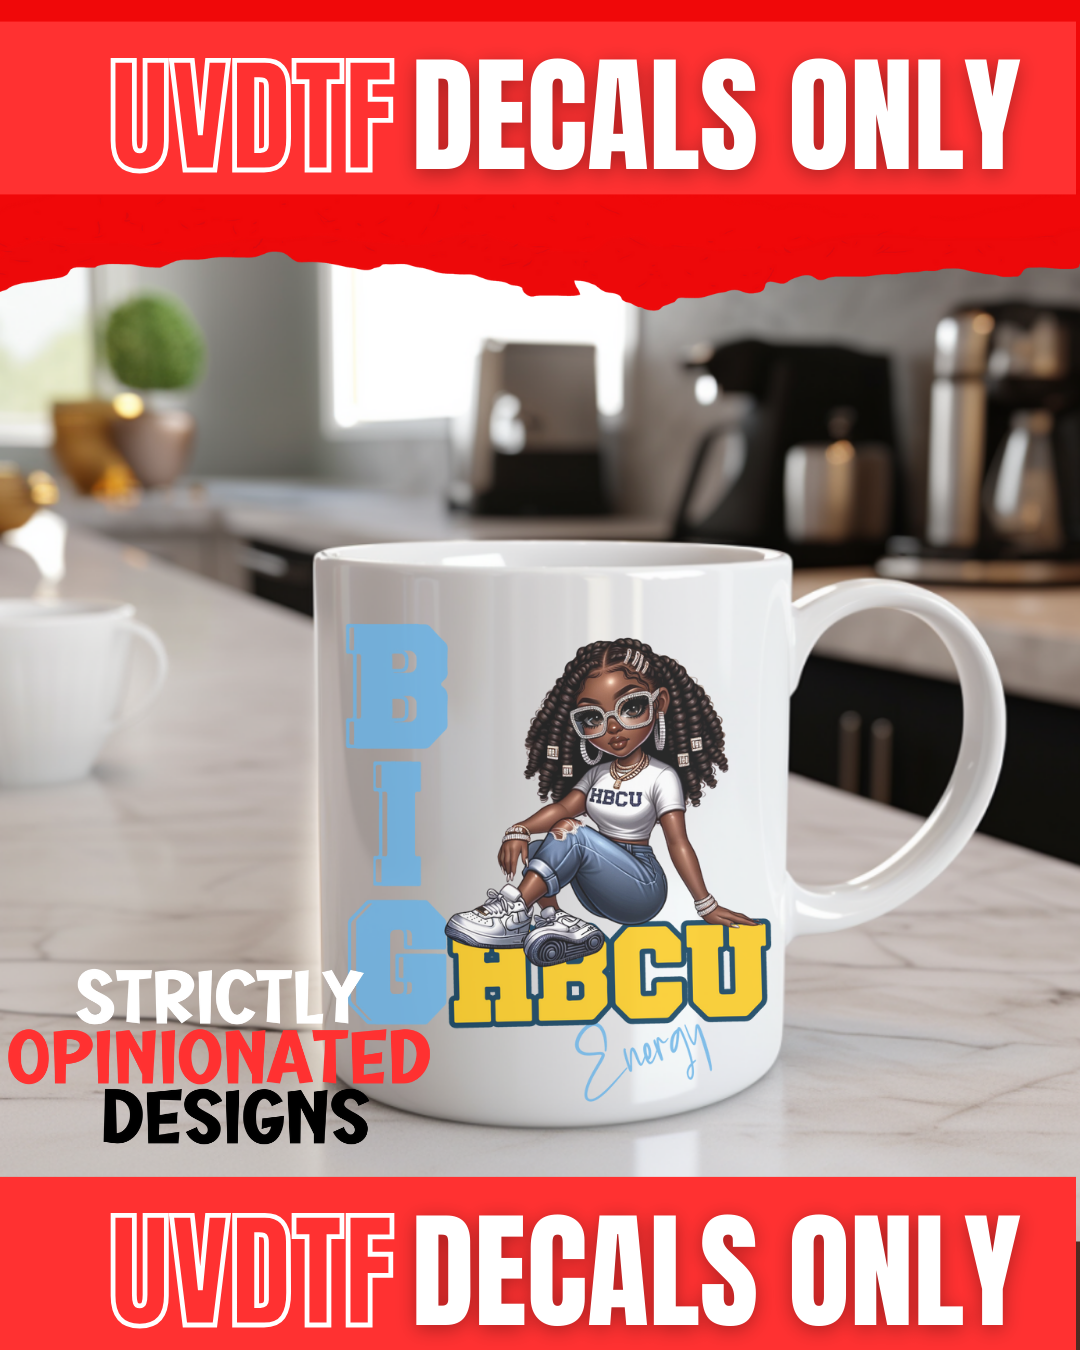 4x4 Hbcu energy Light Blue and Yellow (sod 260)